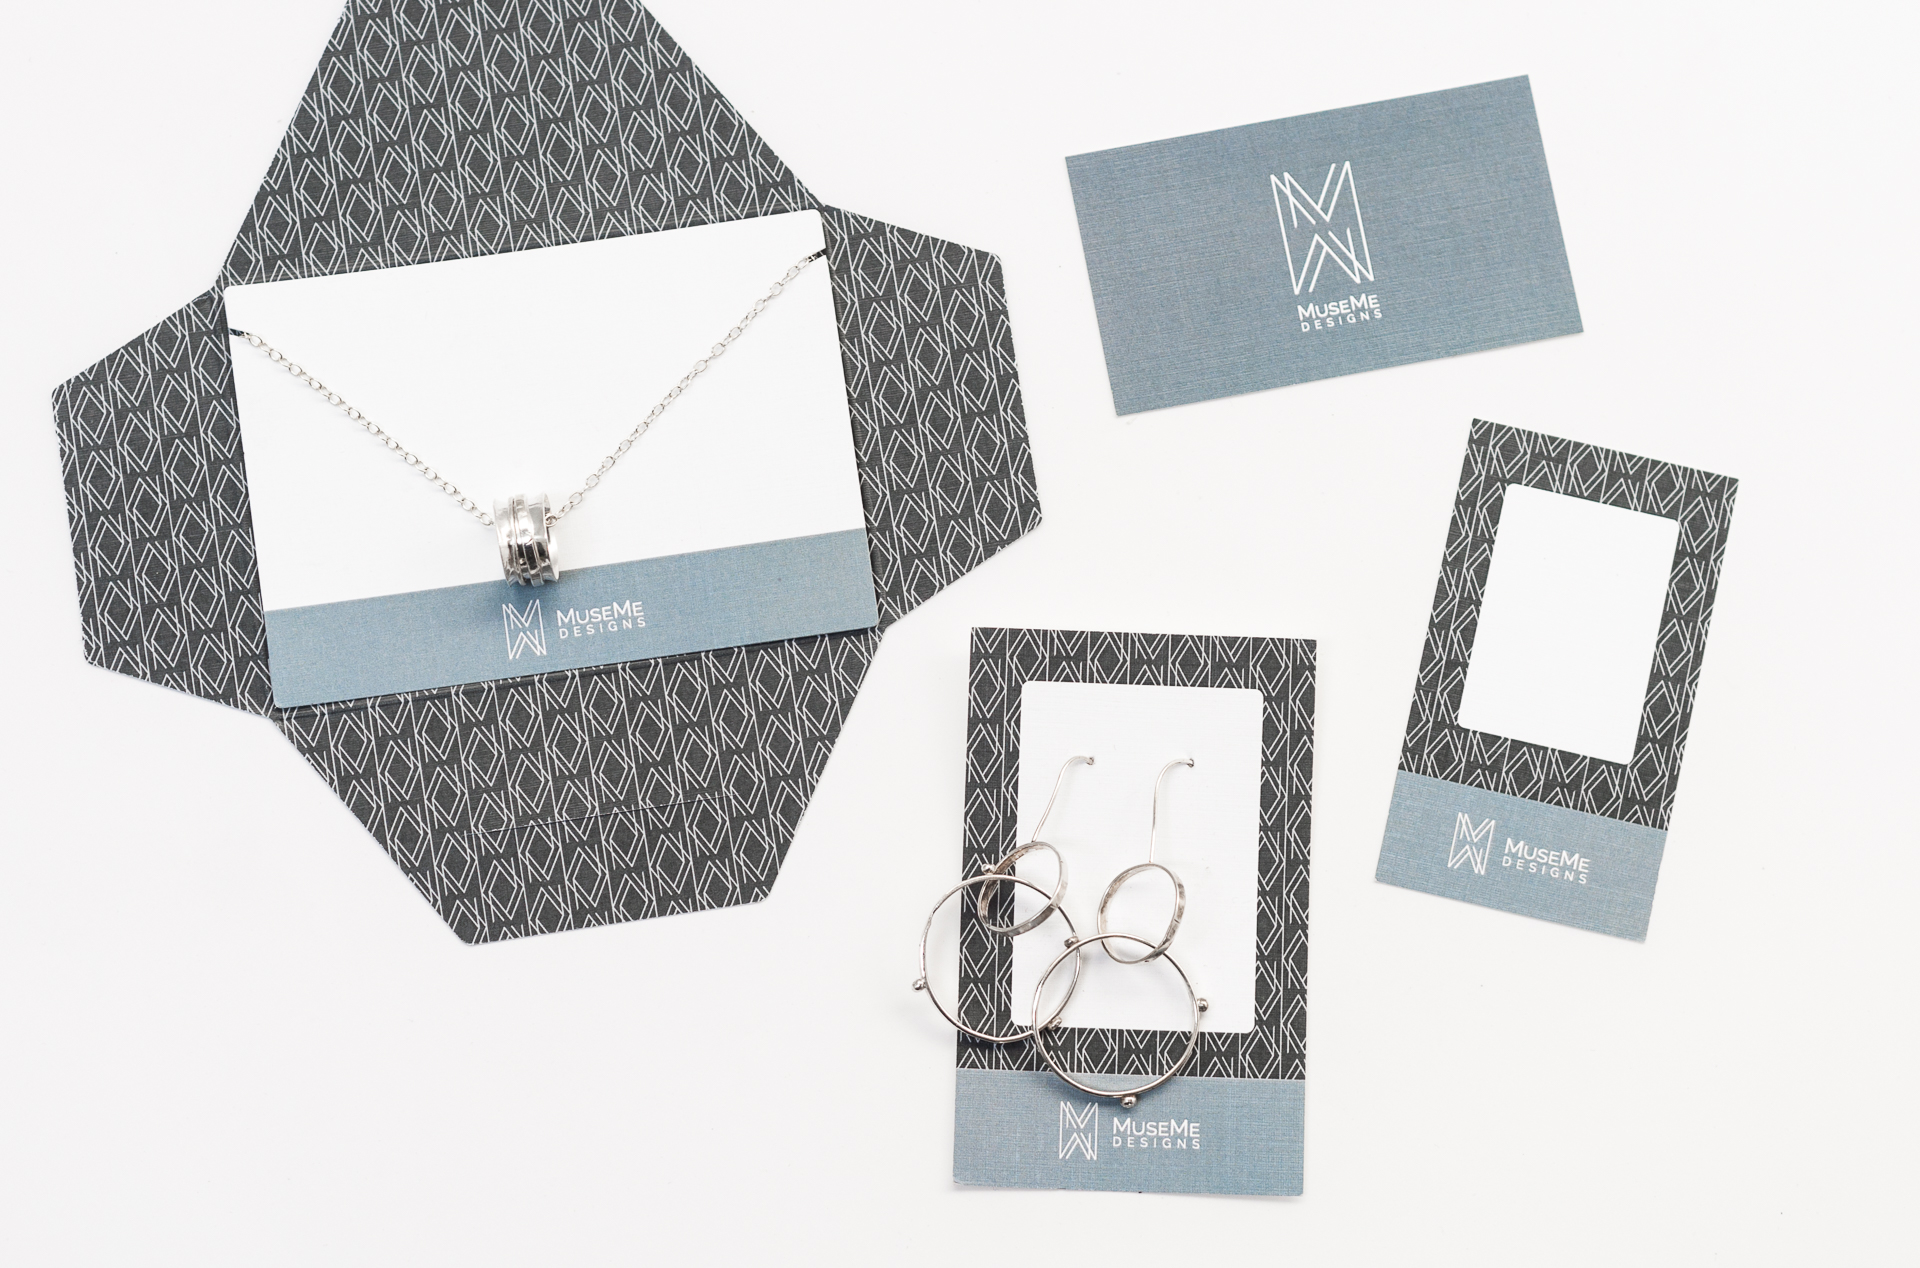  Some elements of MuseMe’s new packaging, including the necklace envelope and card, had to be cut using a custom die cut, which we also facilitated and coordinated on behalf of the client. 